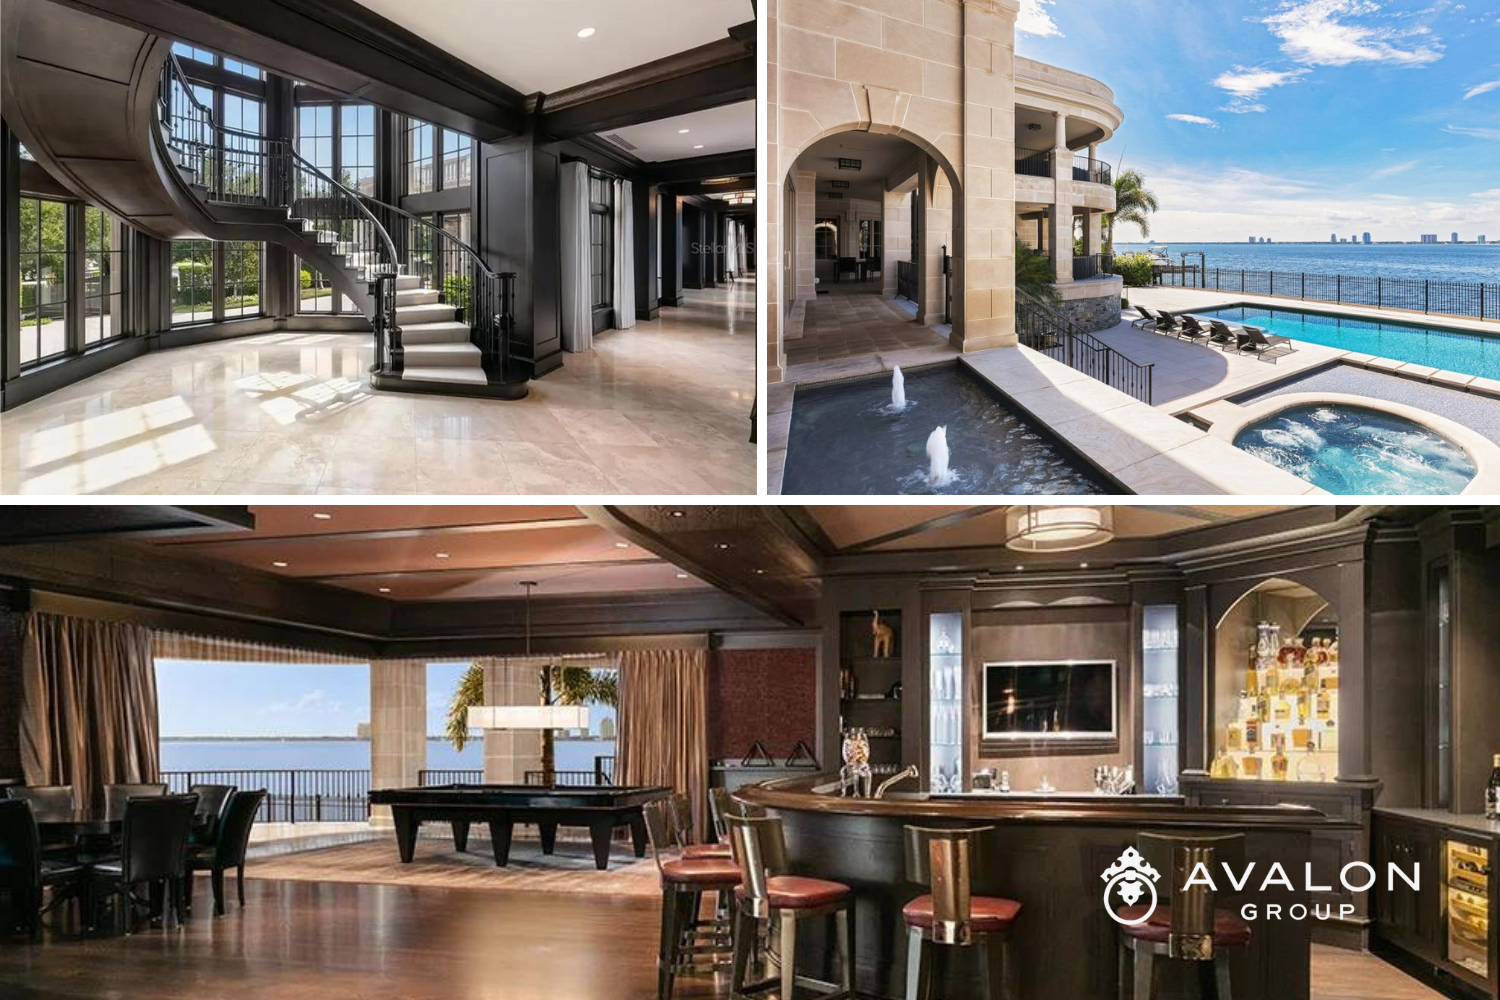 The grand staircase, pool view, and bar area of Derek Jeter's Tampa Home. The interior colors are black and warm tones.